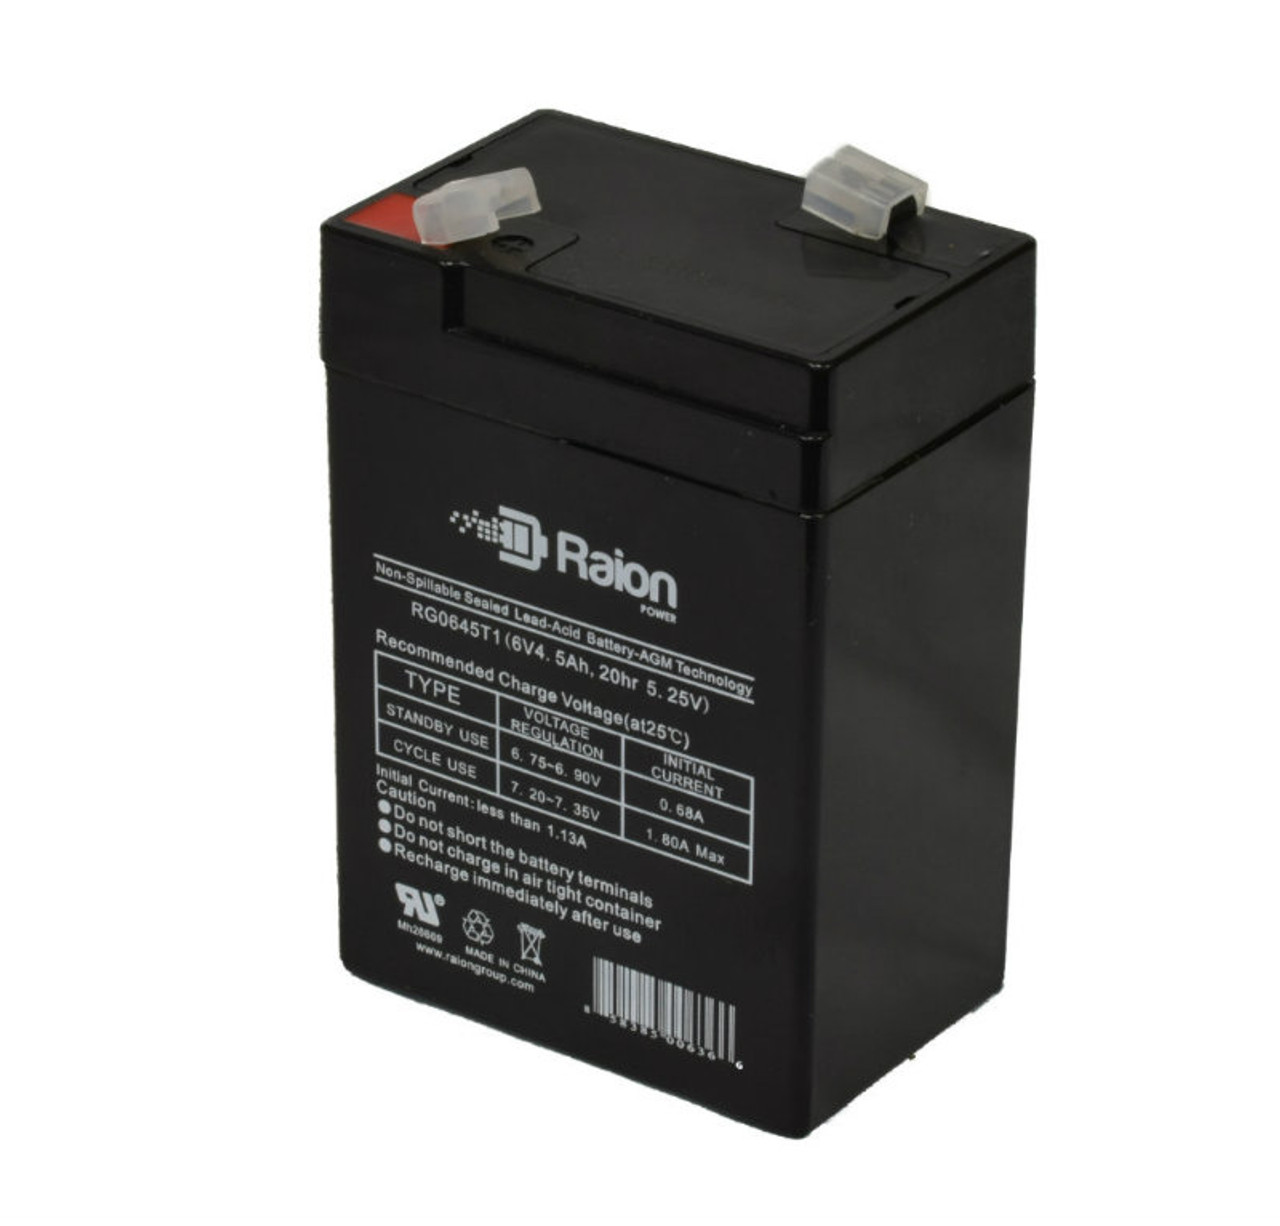 Raion Power RG0645T1 6V 4.5Ah Replacement Battery Cartridge for Nellcor Pulse Oximeter N1000